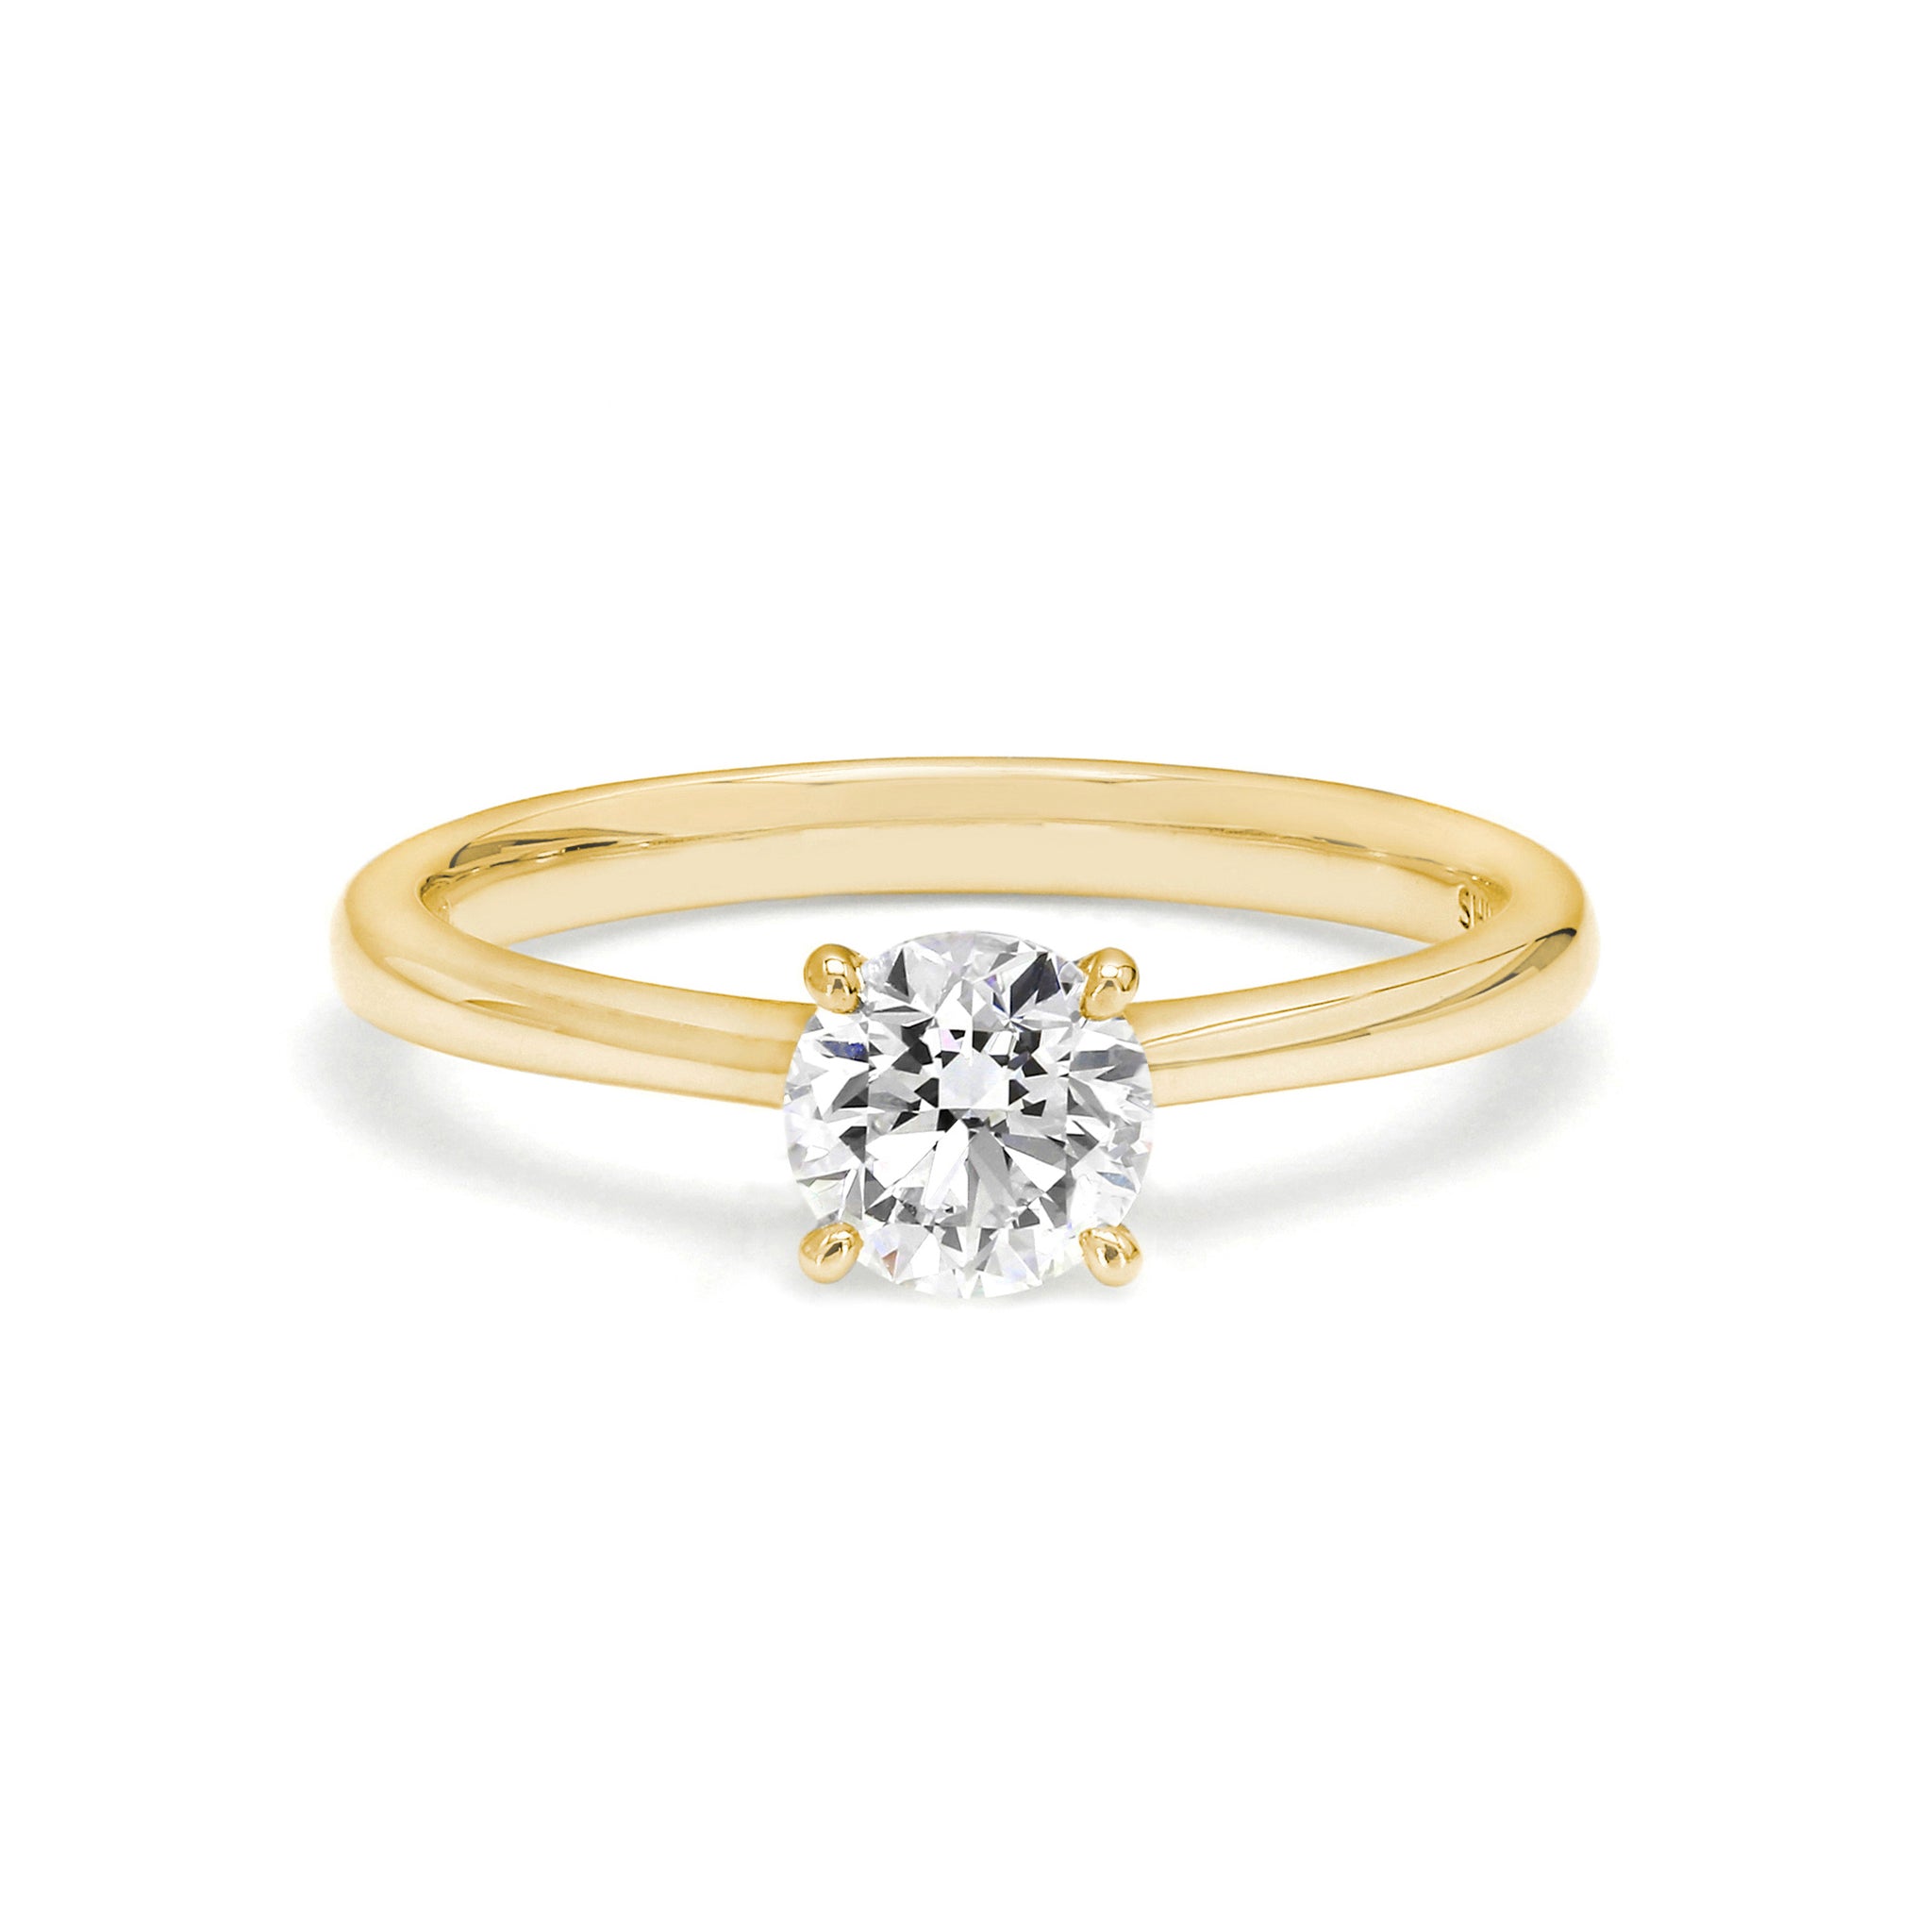 Victoria Diamond Engagement Ring 0.70 Carat in 18K Yellow Gold Front View